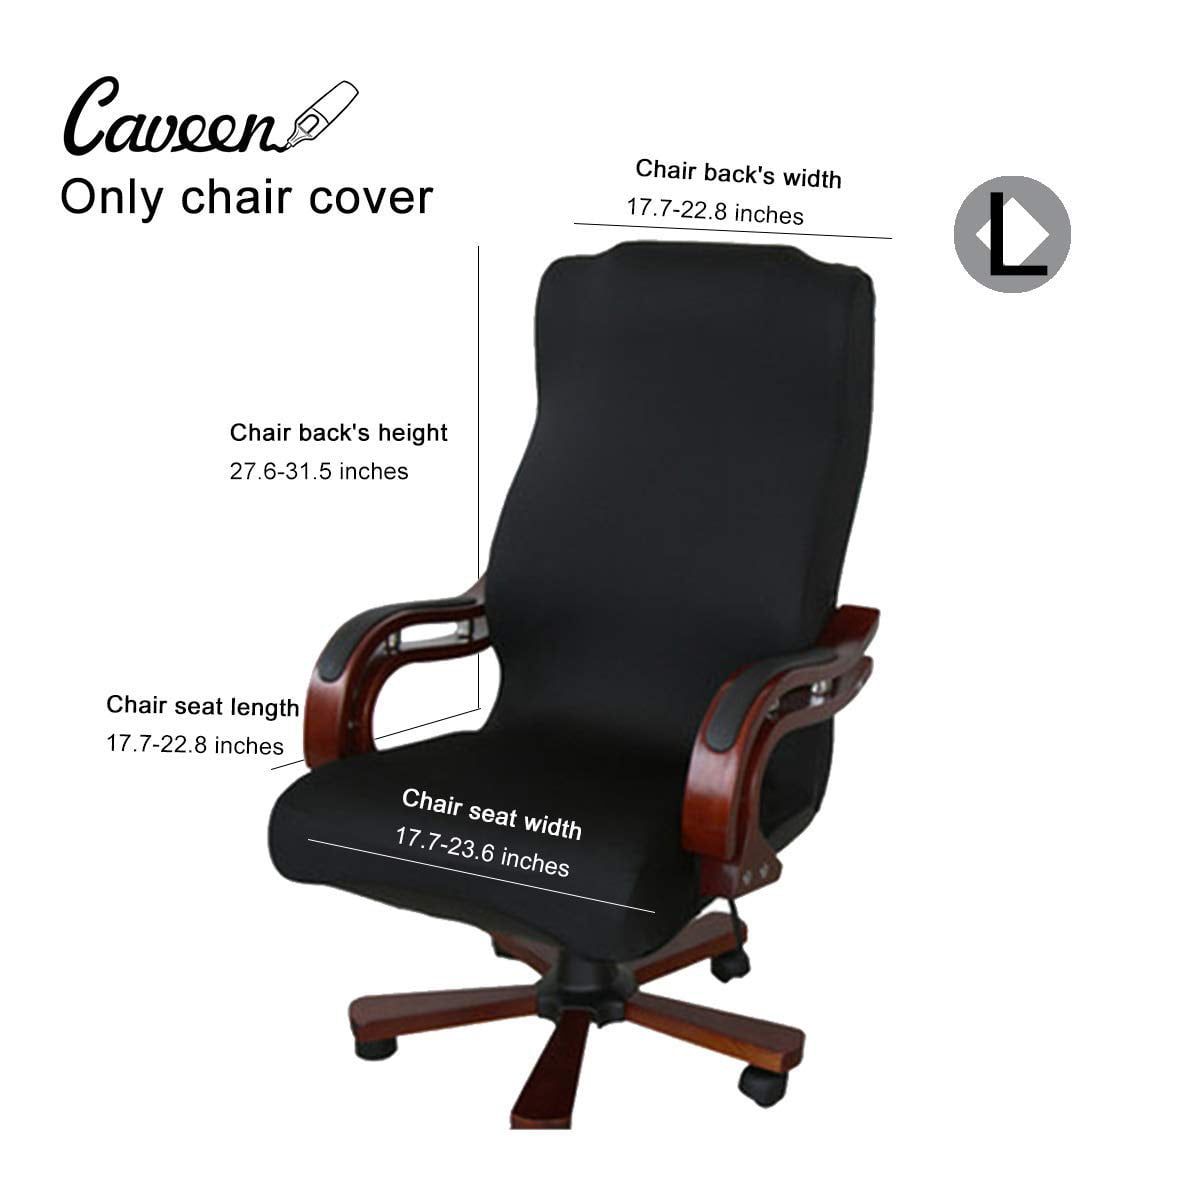 Homaxy Premium Jacquard Office Computer Chair Backrest Protectors Stretchable Rotating Desk Chair Covers Fit Circle Design Chair Back Rest Burgundy Slipcover 